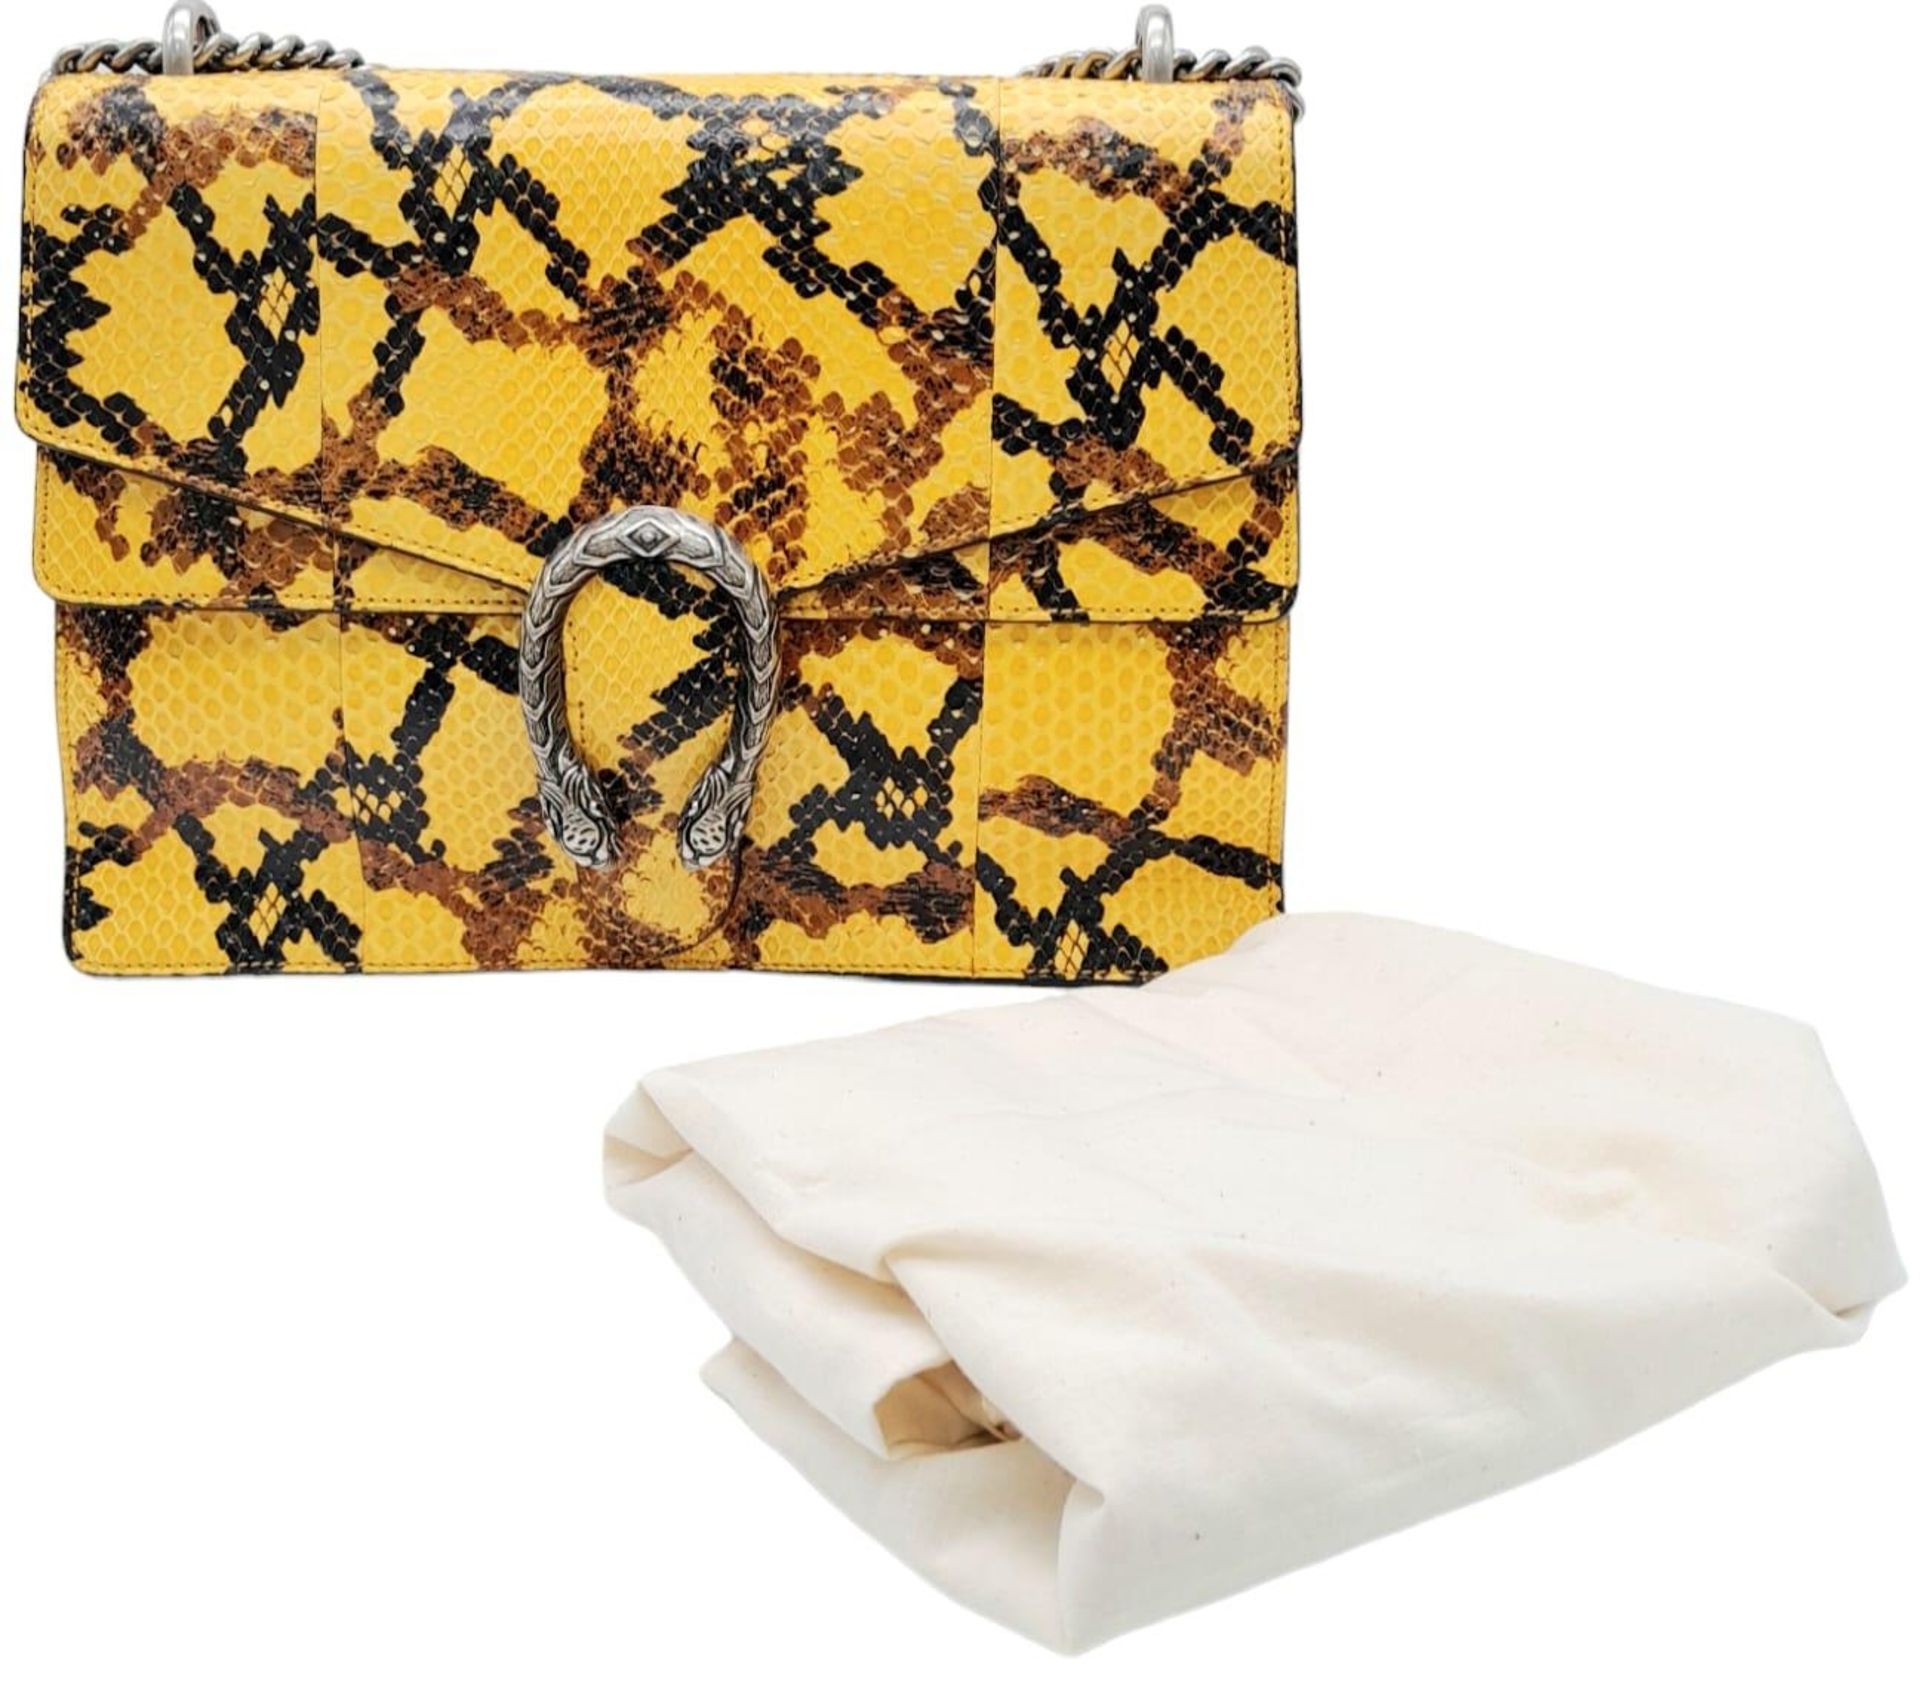 A Gucci Dionysus Python Pochette. With Silver Metal Hardware and Convertible Silver Metal Chain - Image 2 of 11